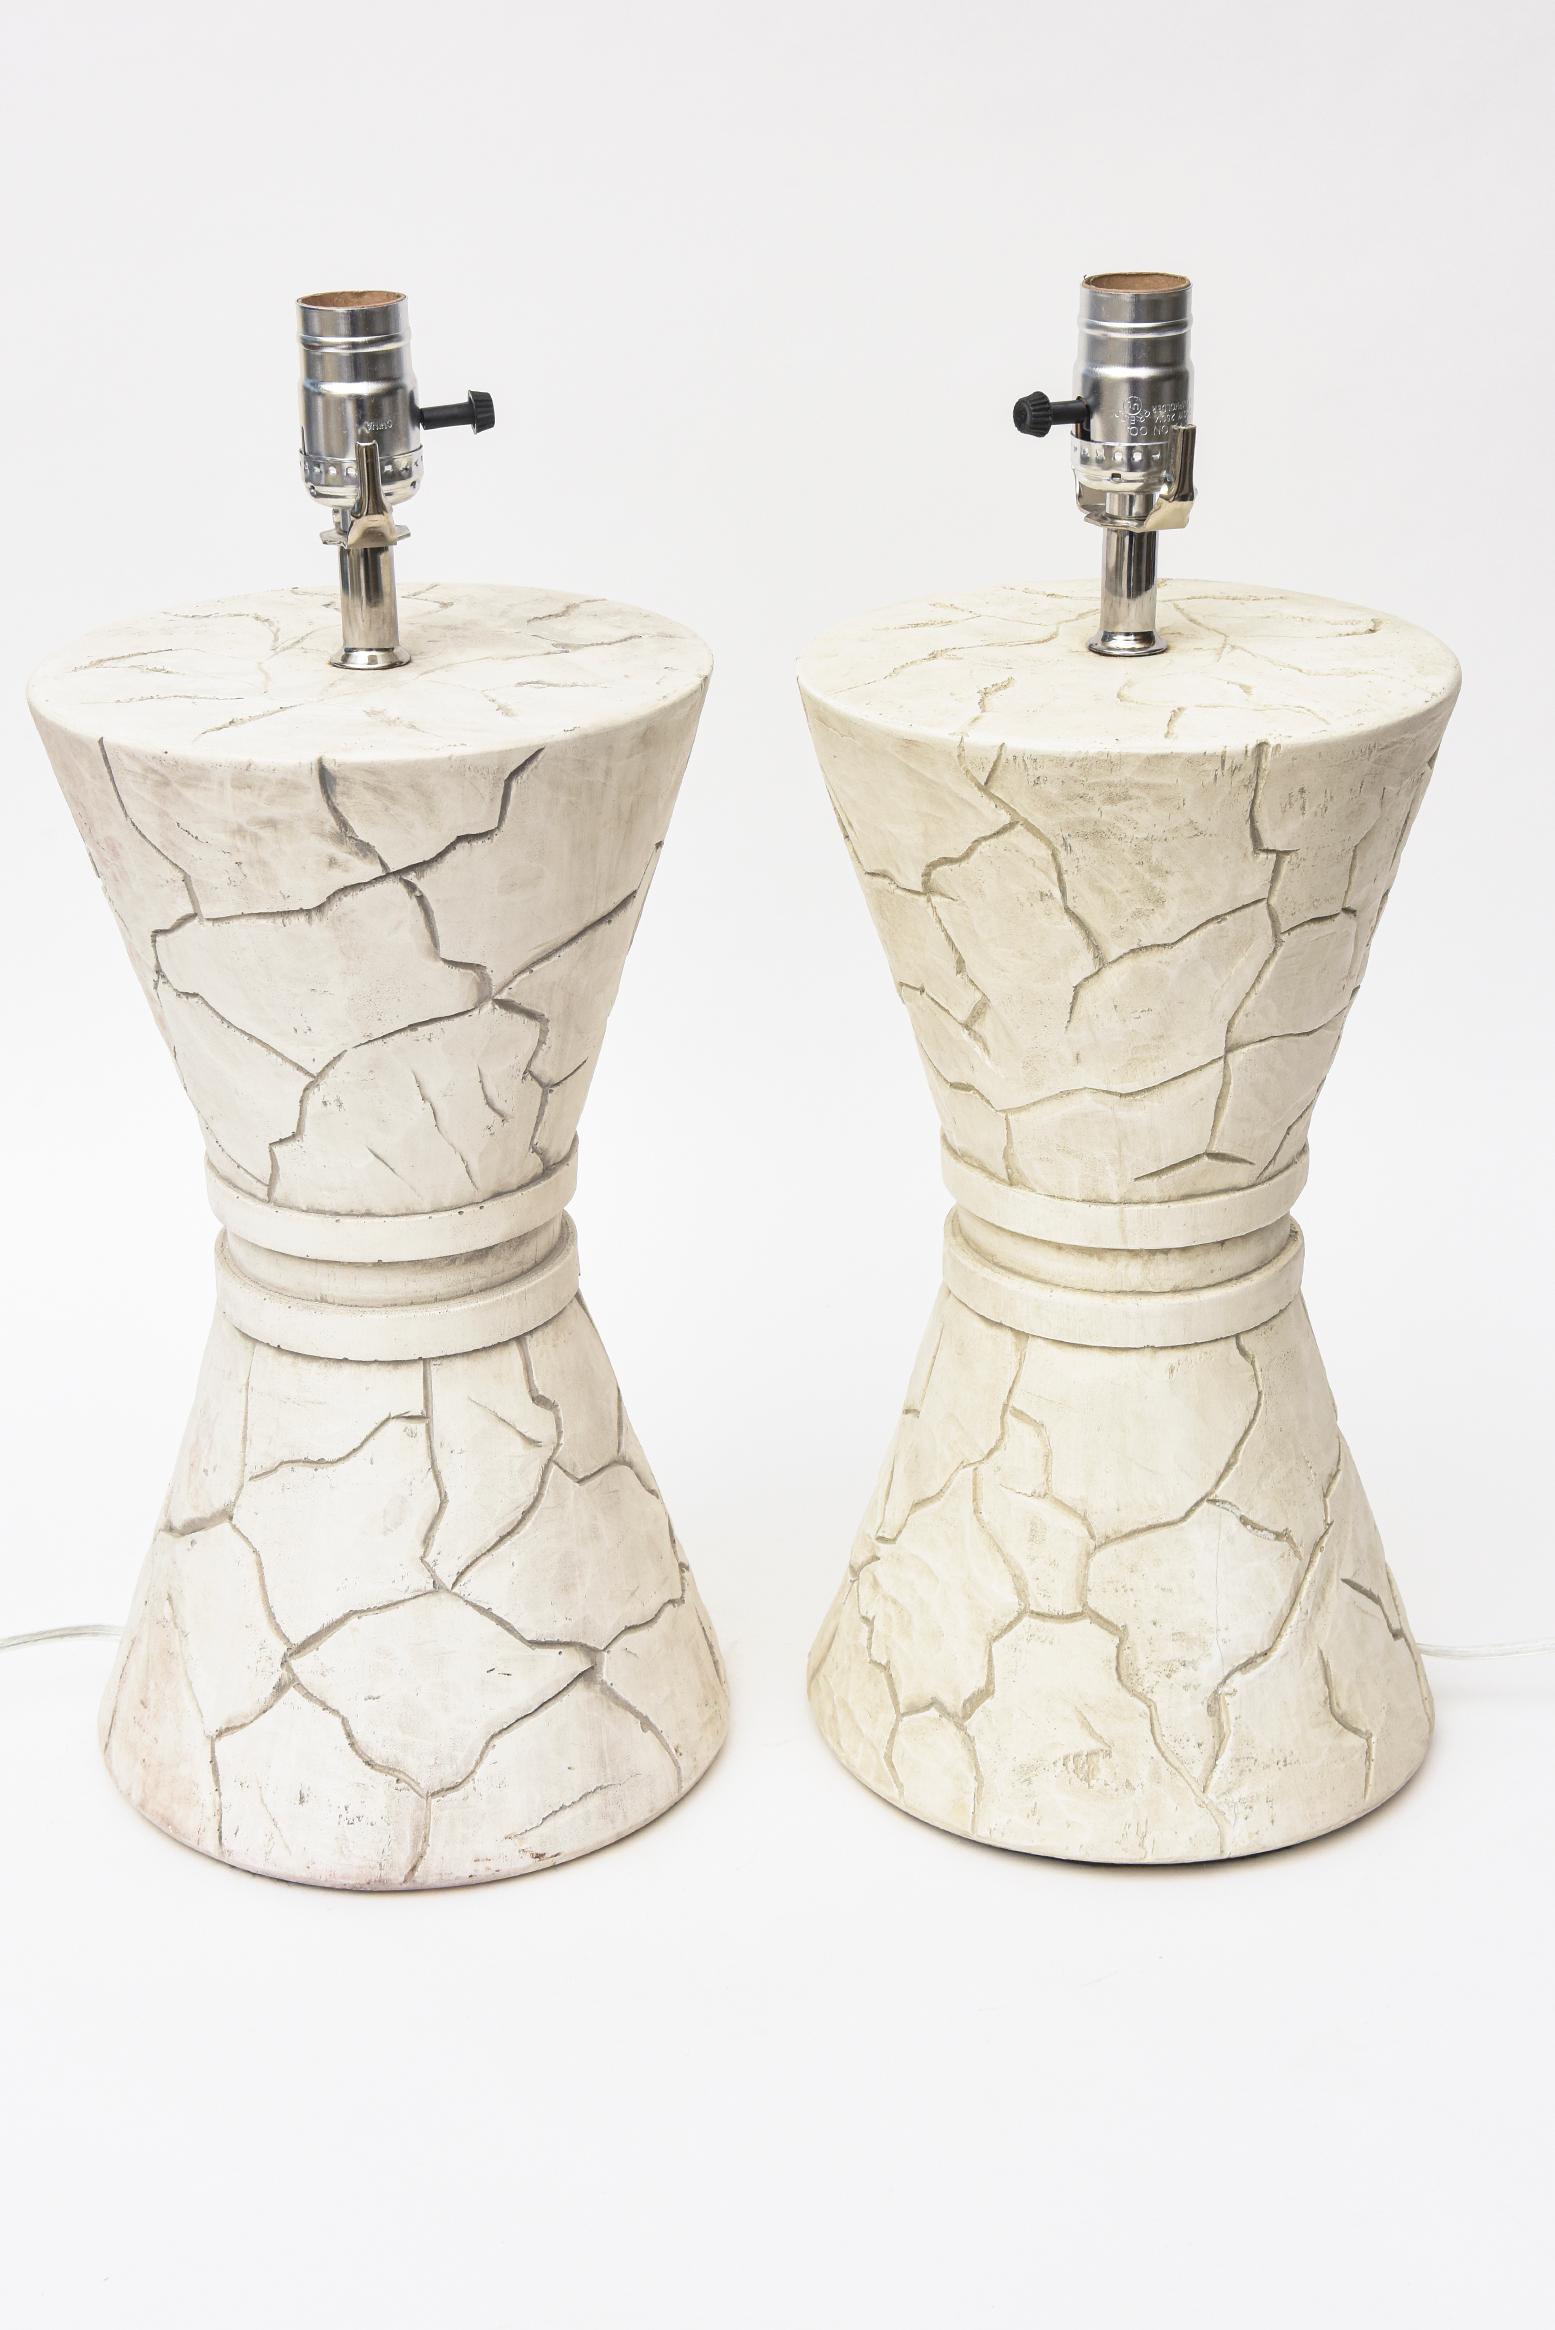 These fabulous pair of ceramic vintage organic modern lamps are initialed but not legible and faded. They are of Japanese artistry and origin. Their pebbled design makes for a great statement piece with their incised bark like style of indentations